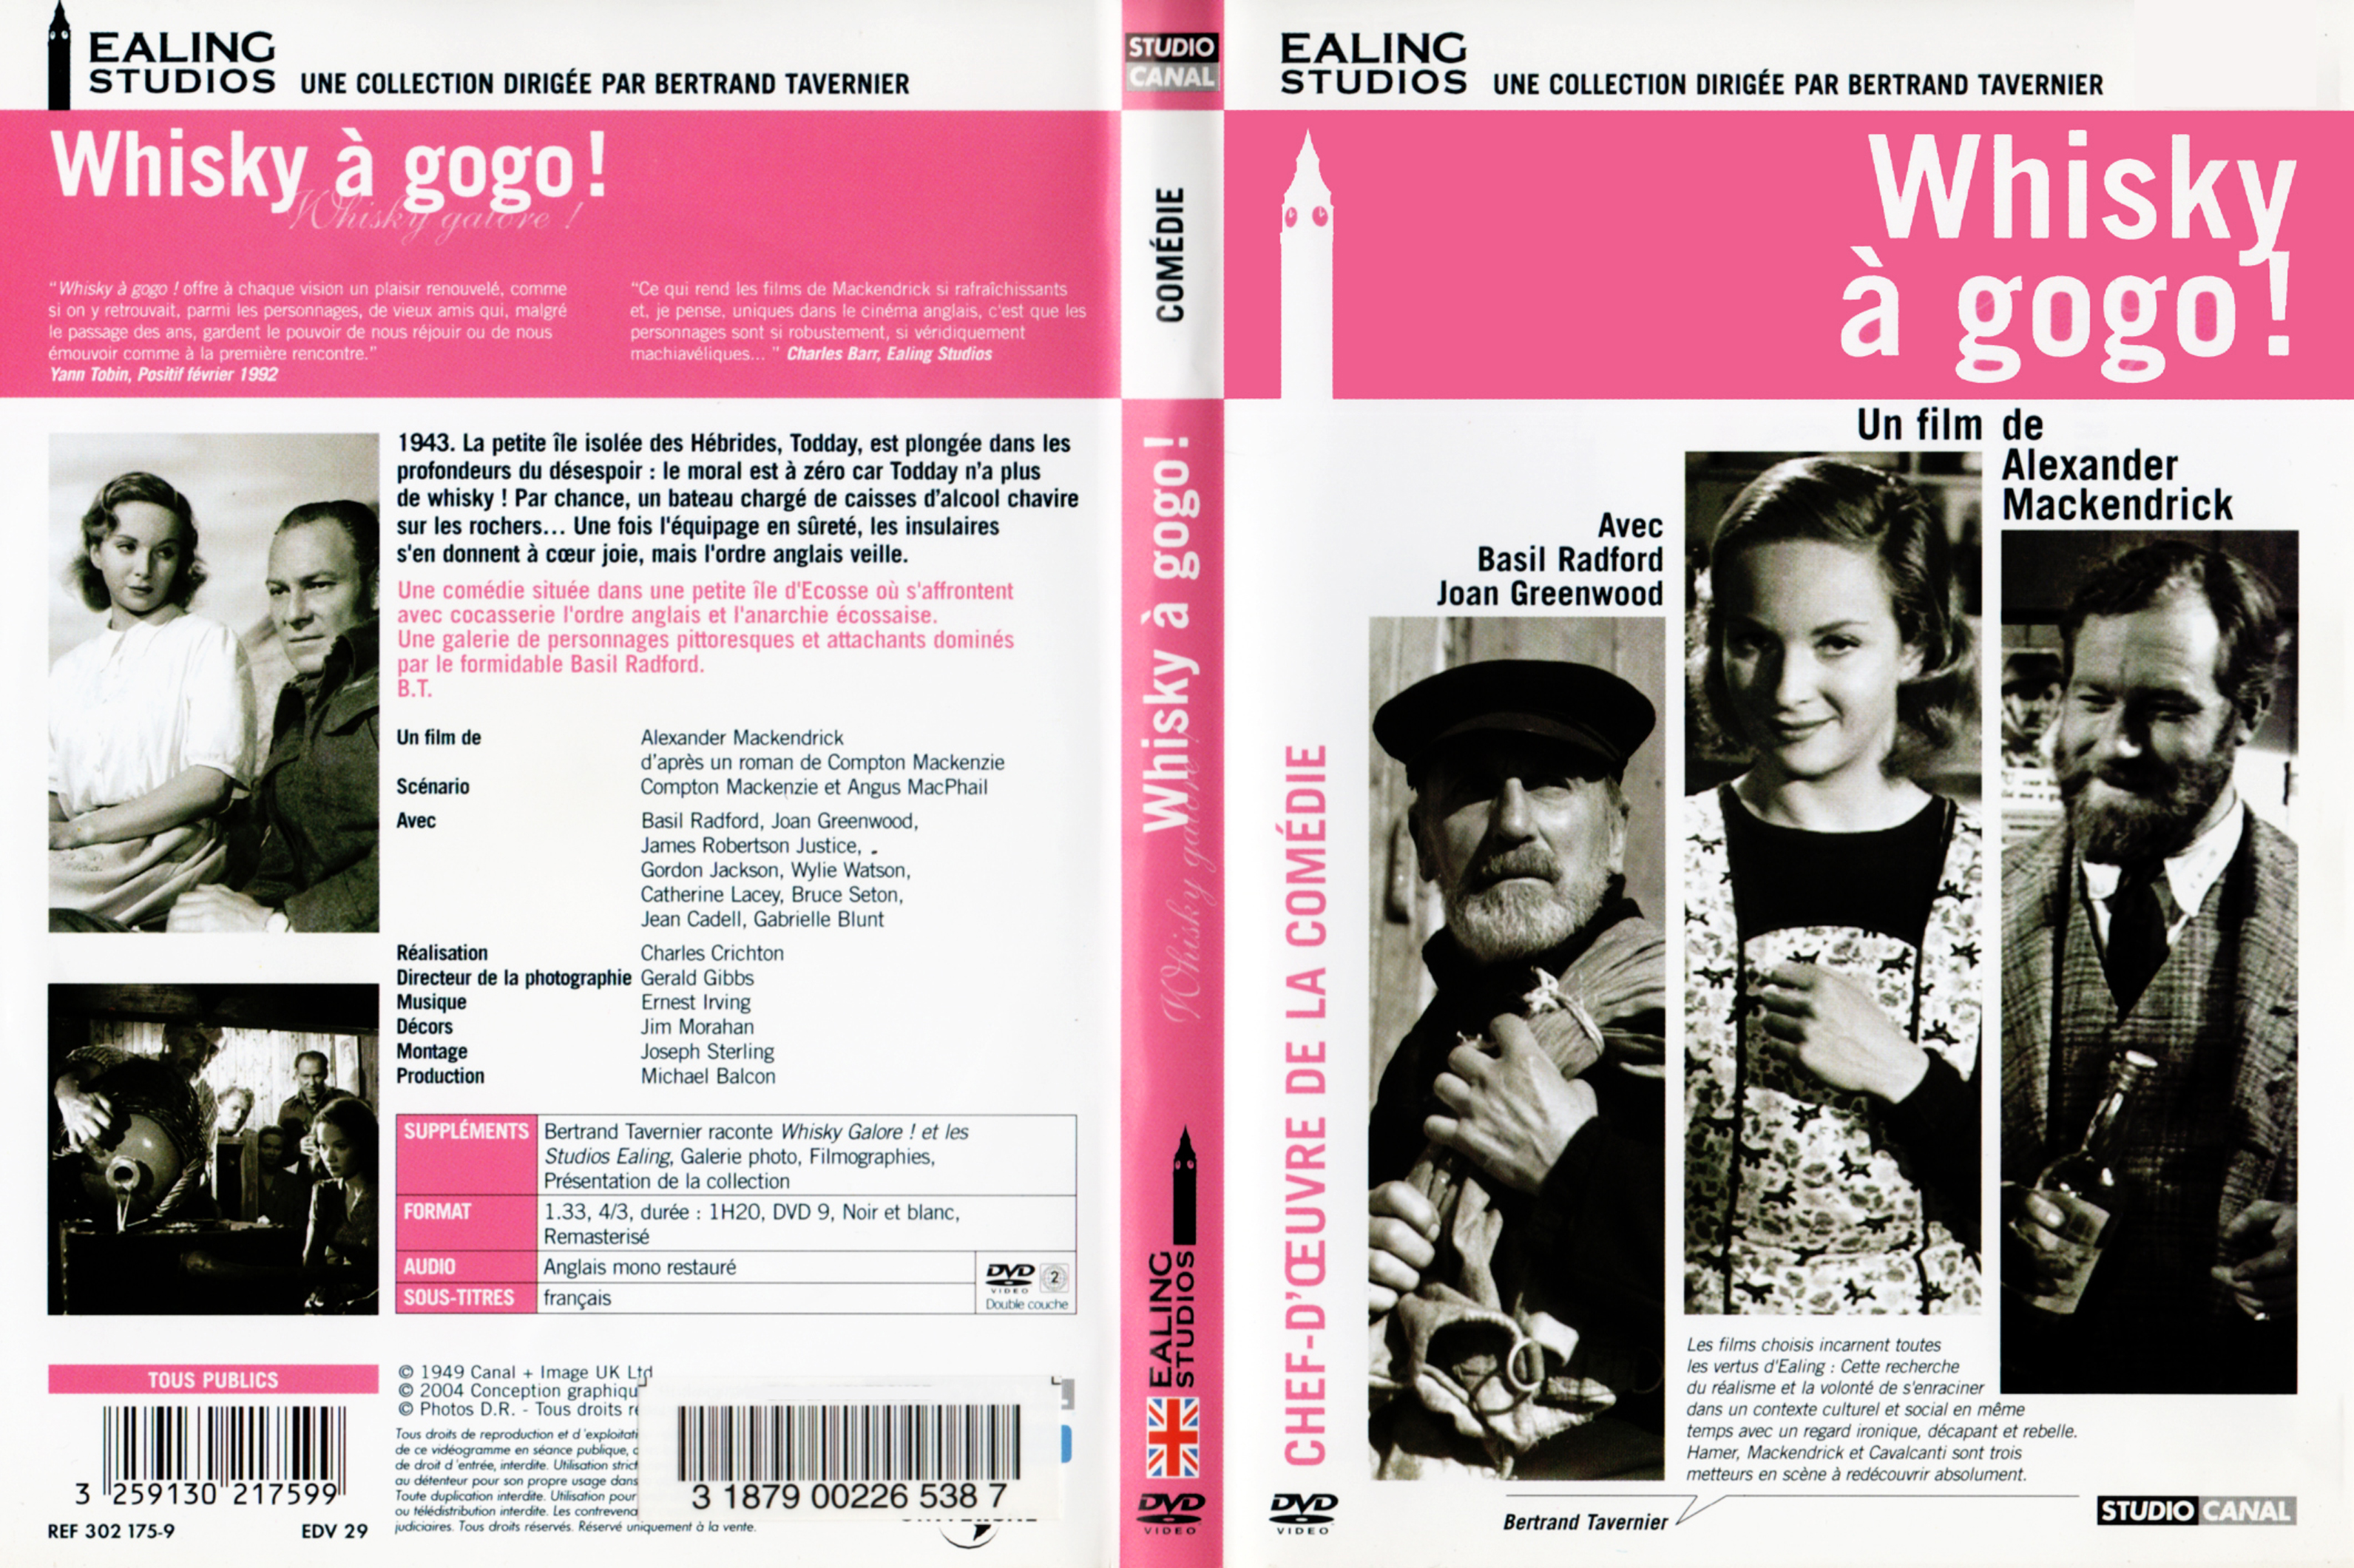 Jaquette DVD Whisky  gogo